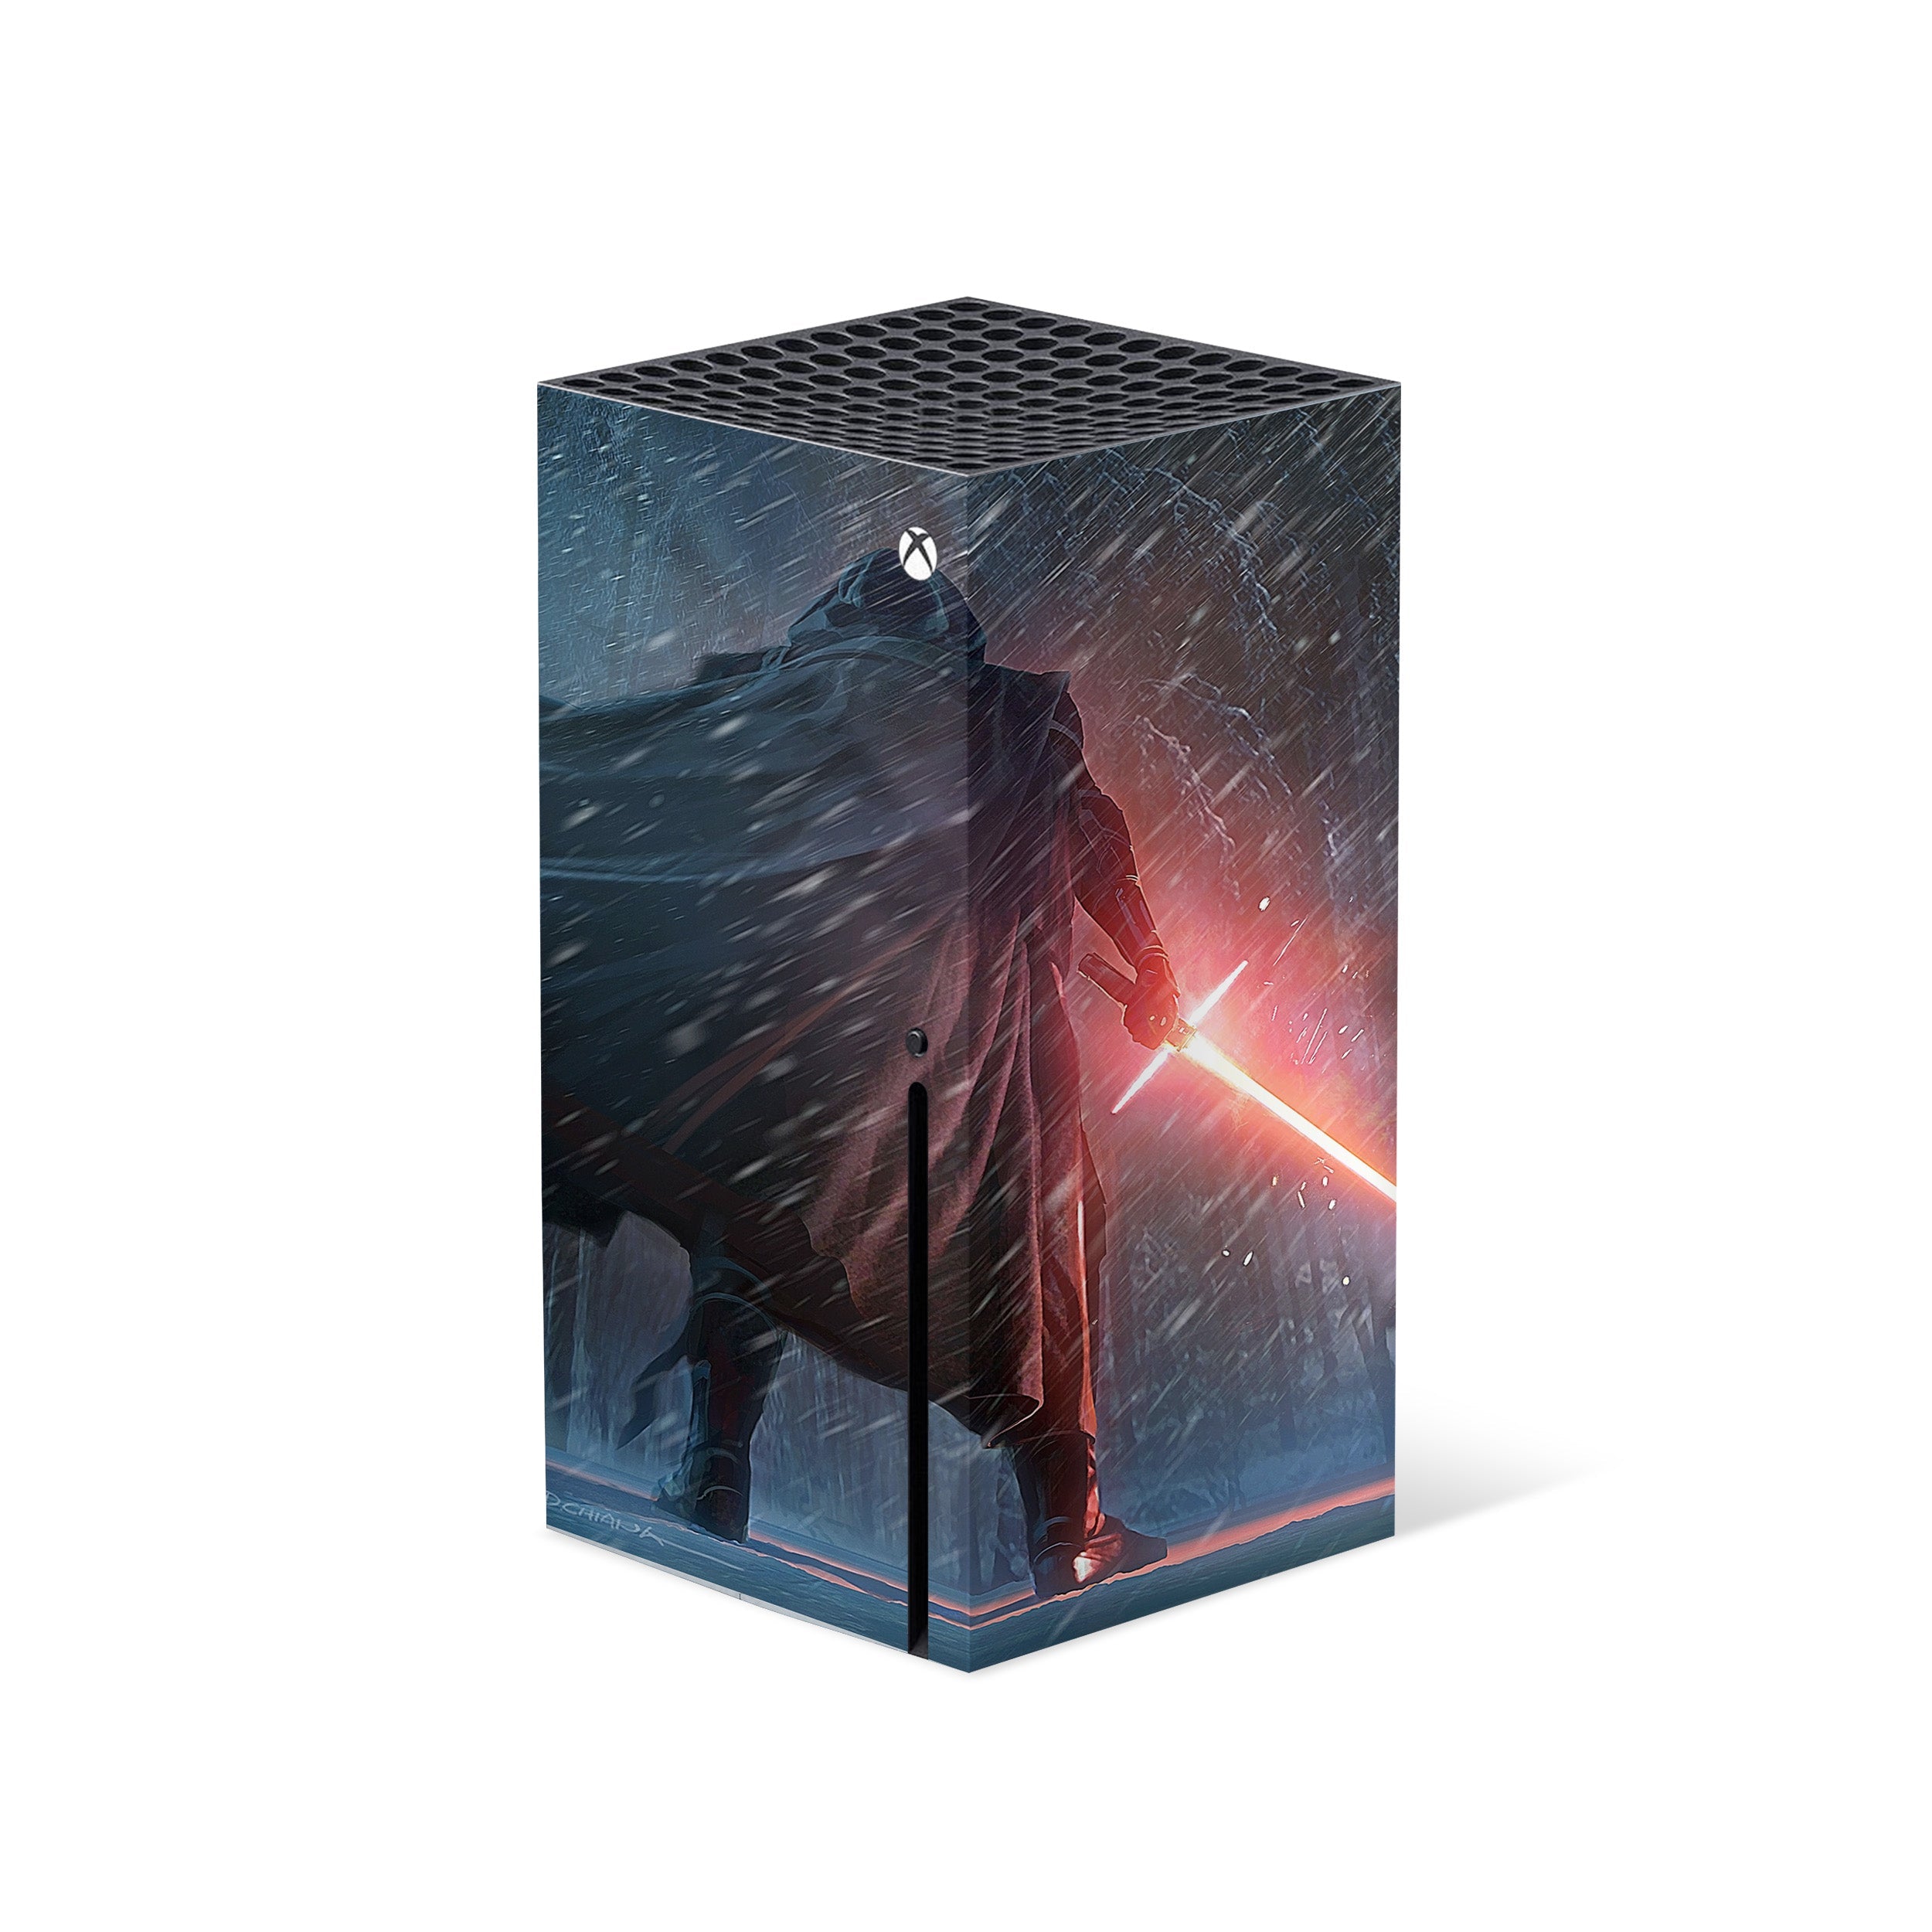 A video game skin featuring a Star Wars Kylo Ren design for the Xbox Series X.